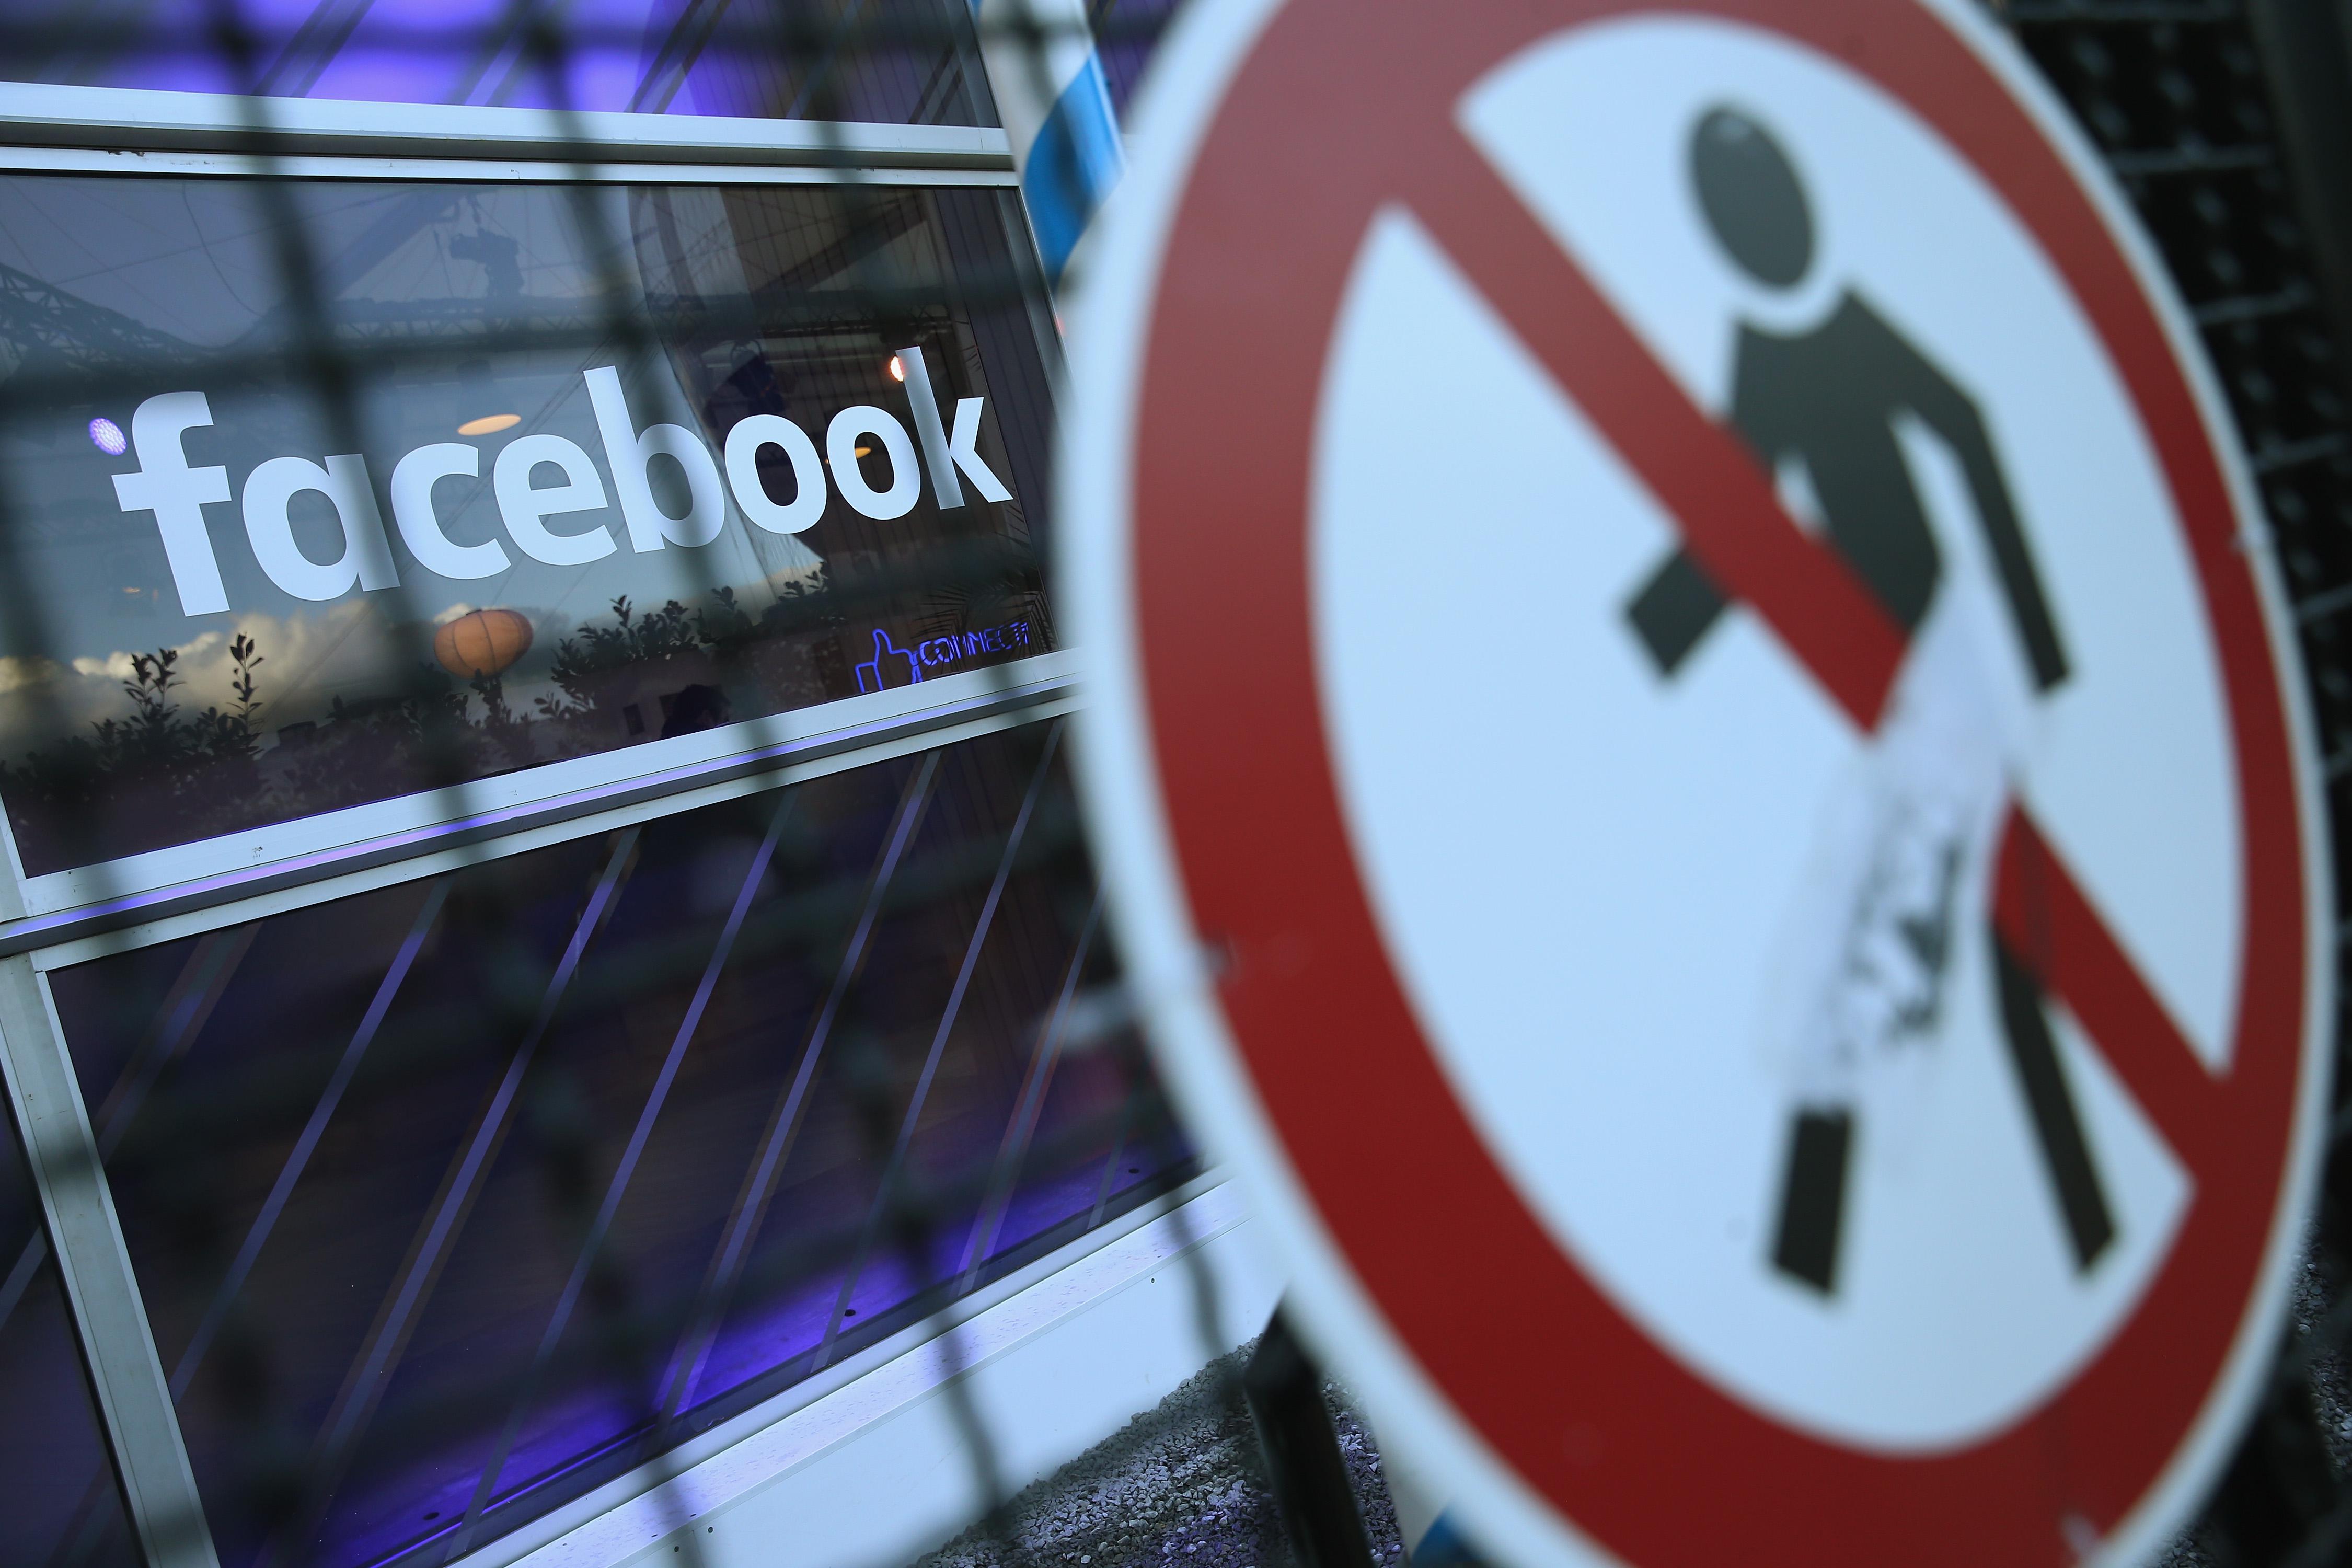 A no entry symbol hangs on an opened gate next to the Facebook logo at the Facebook Innovation Hub on Feb. 24, 2016 in Berlin.